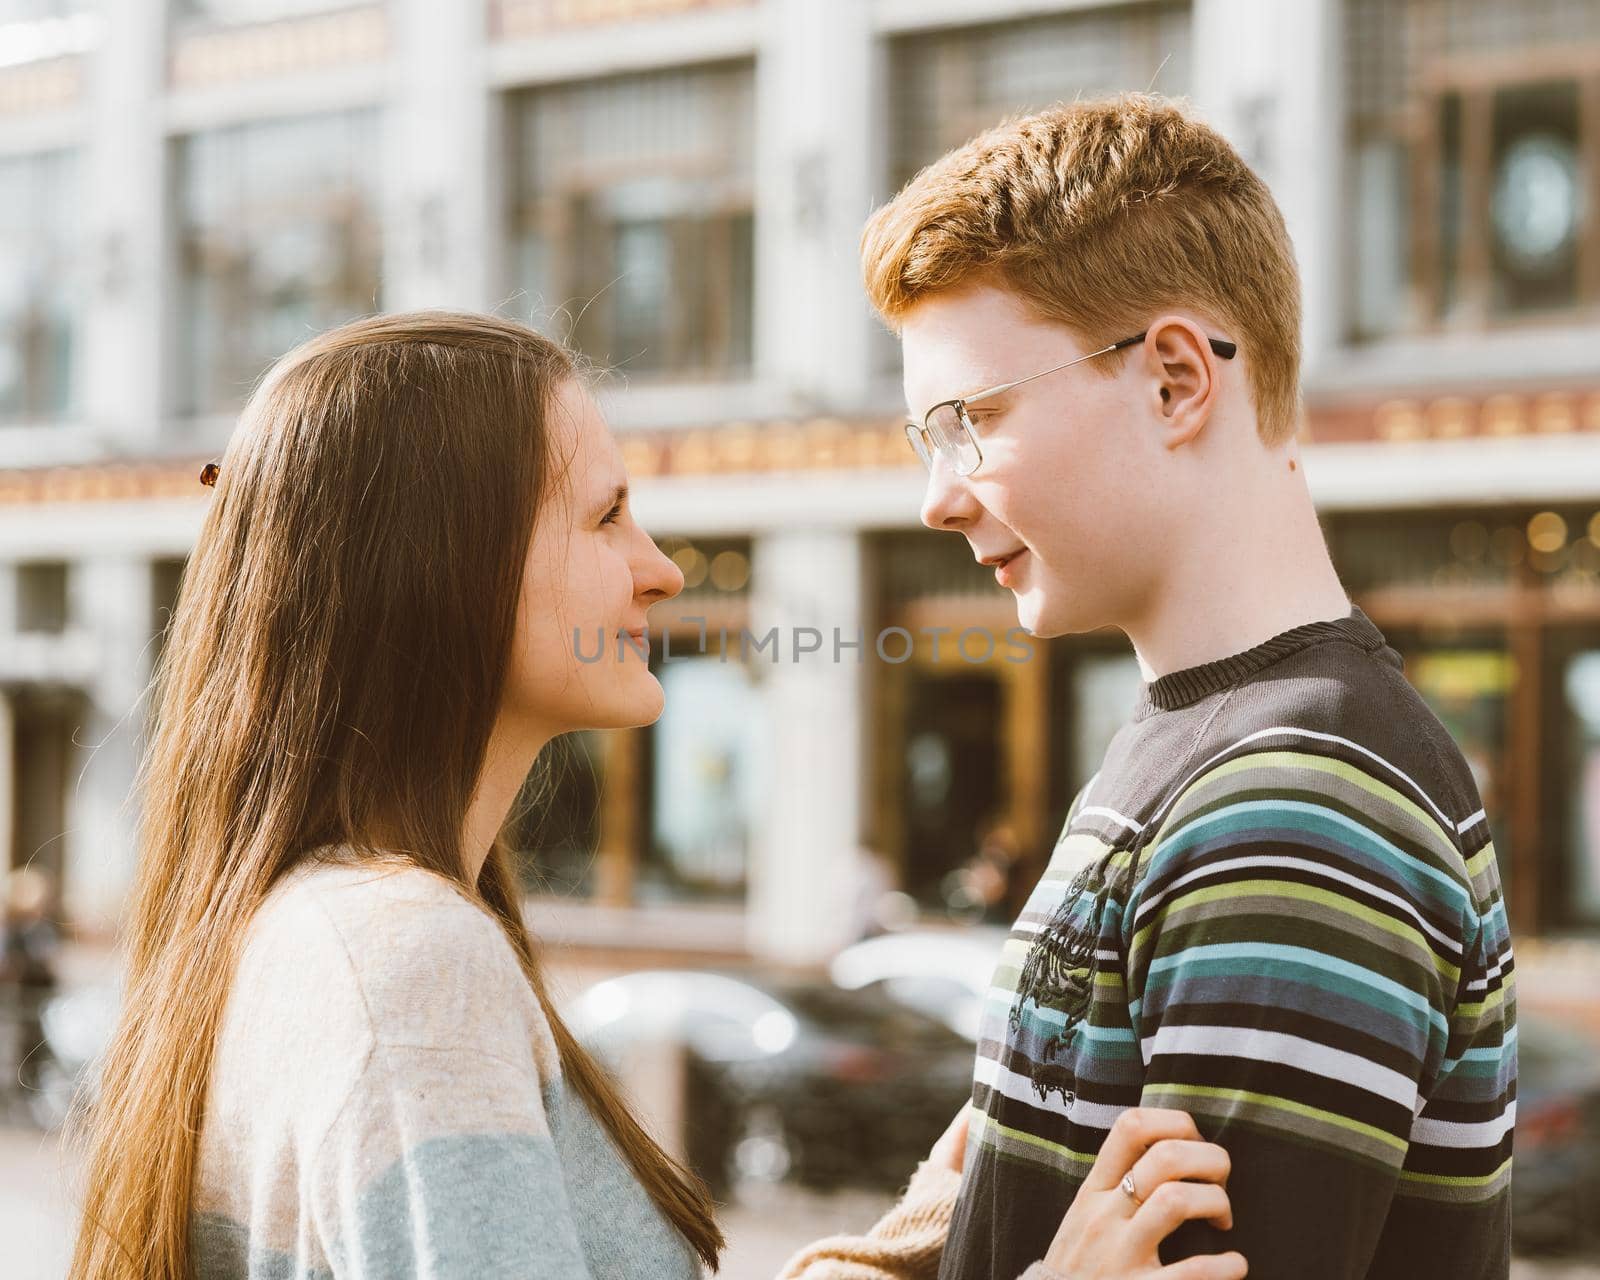 Male and female person looking at each other, young couple full of love. The redhead boy looks tenderly at girl and kiss. Concept of teenage love and first kiss, love, relationship. City, waterfront. by NataBene